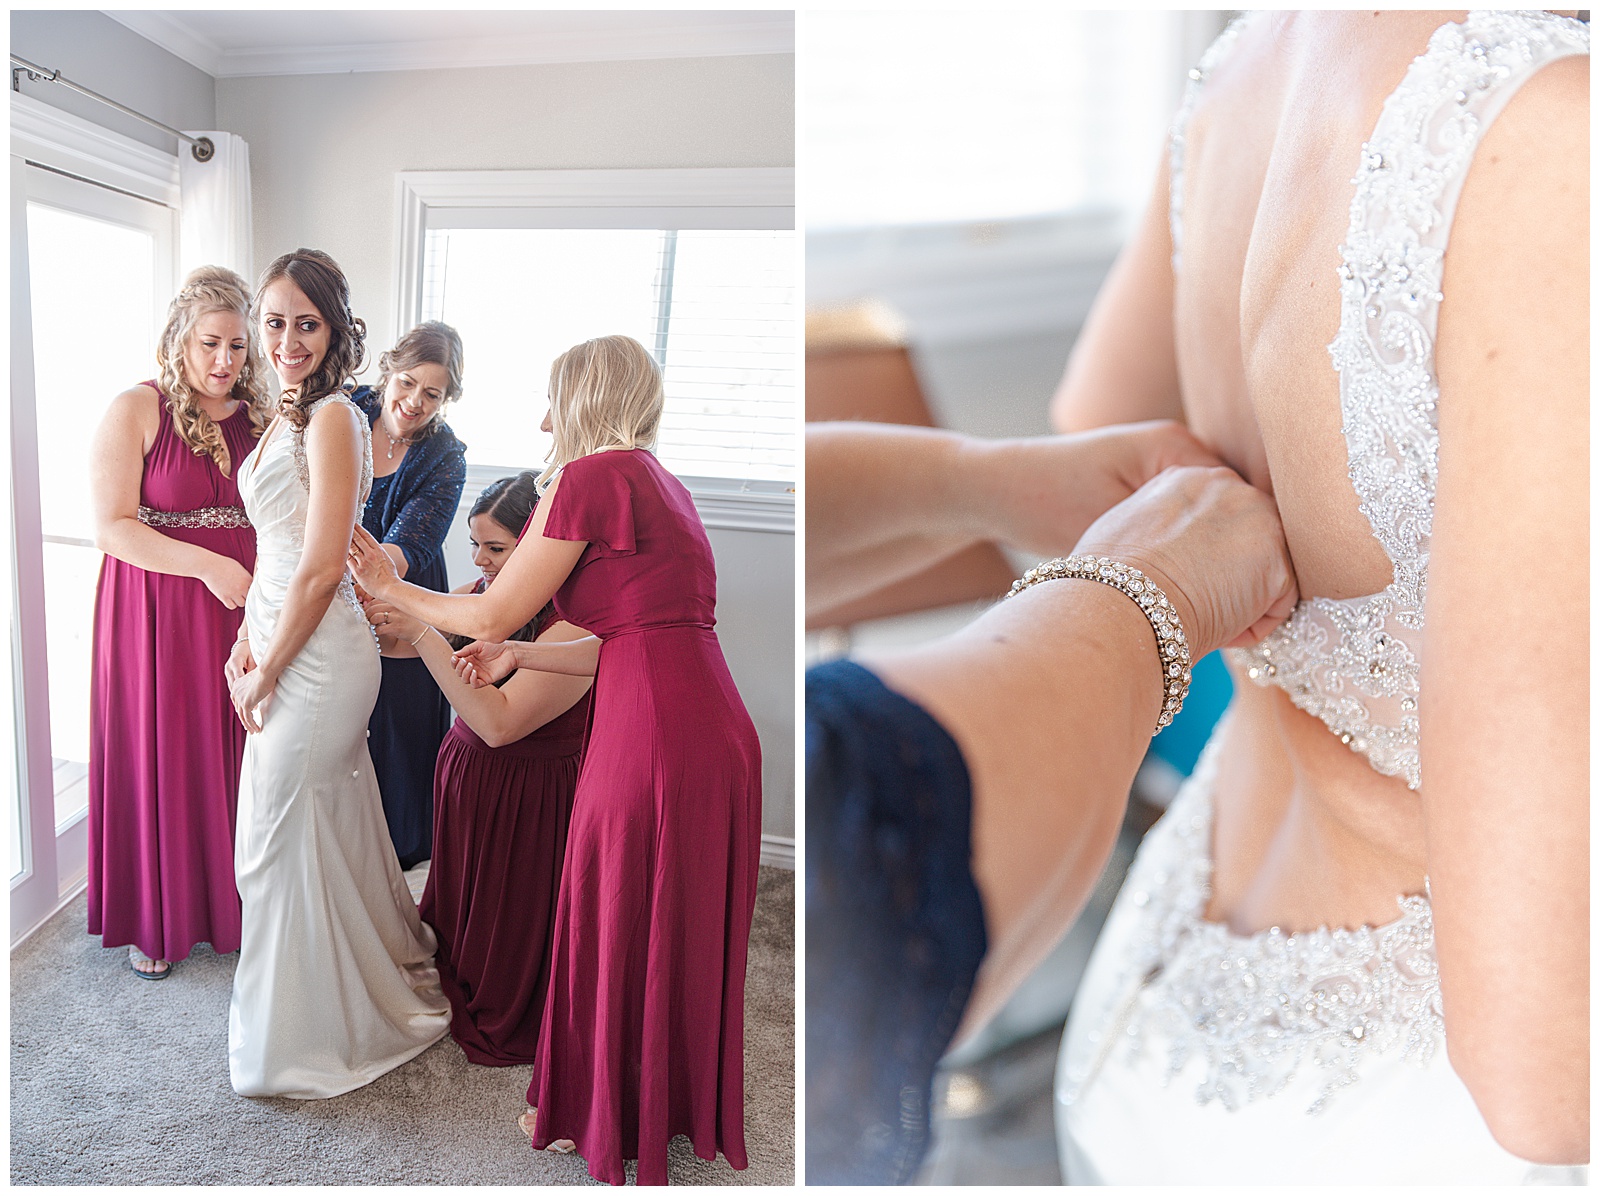 women helping bride get ready on wedding day and buttoning a white dress